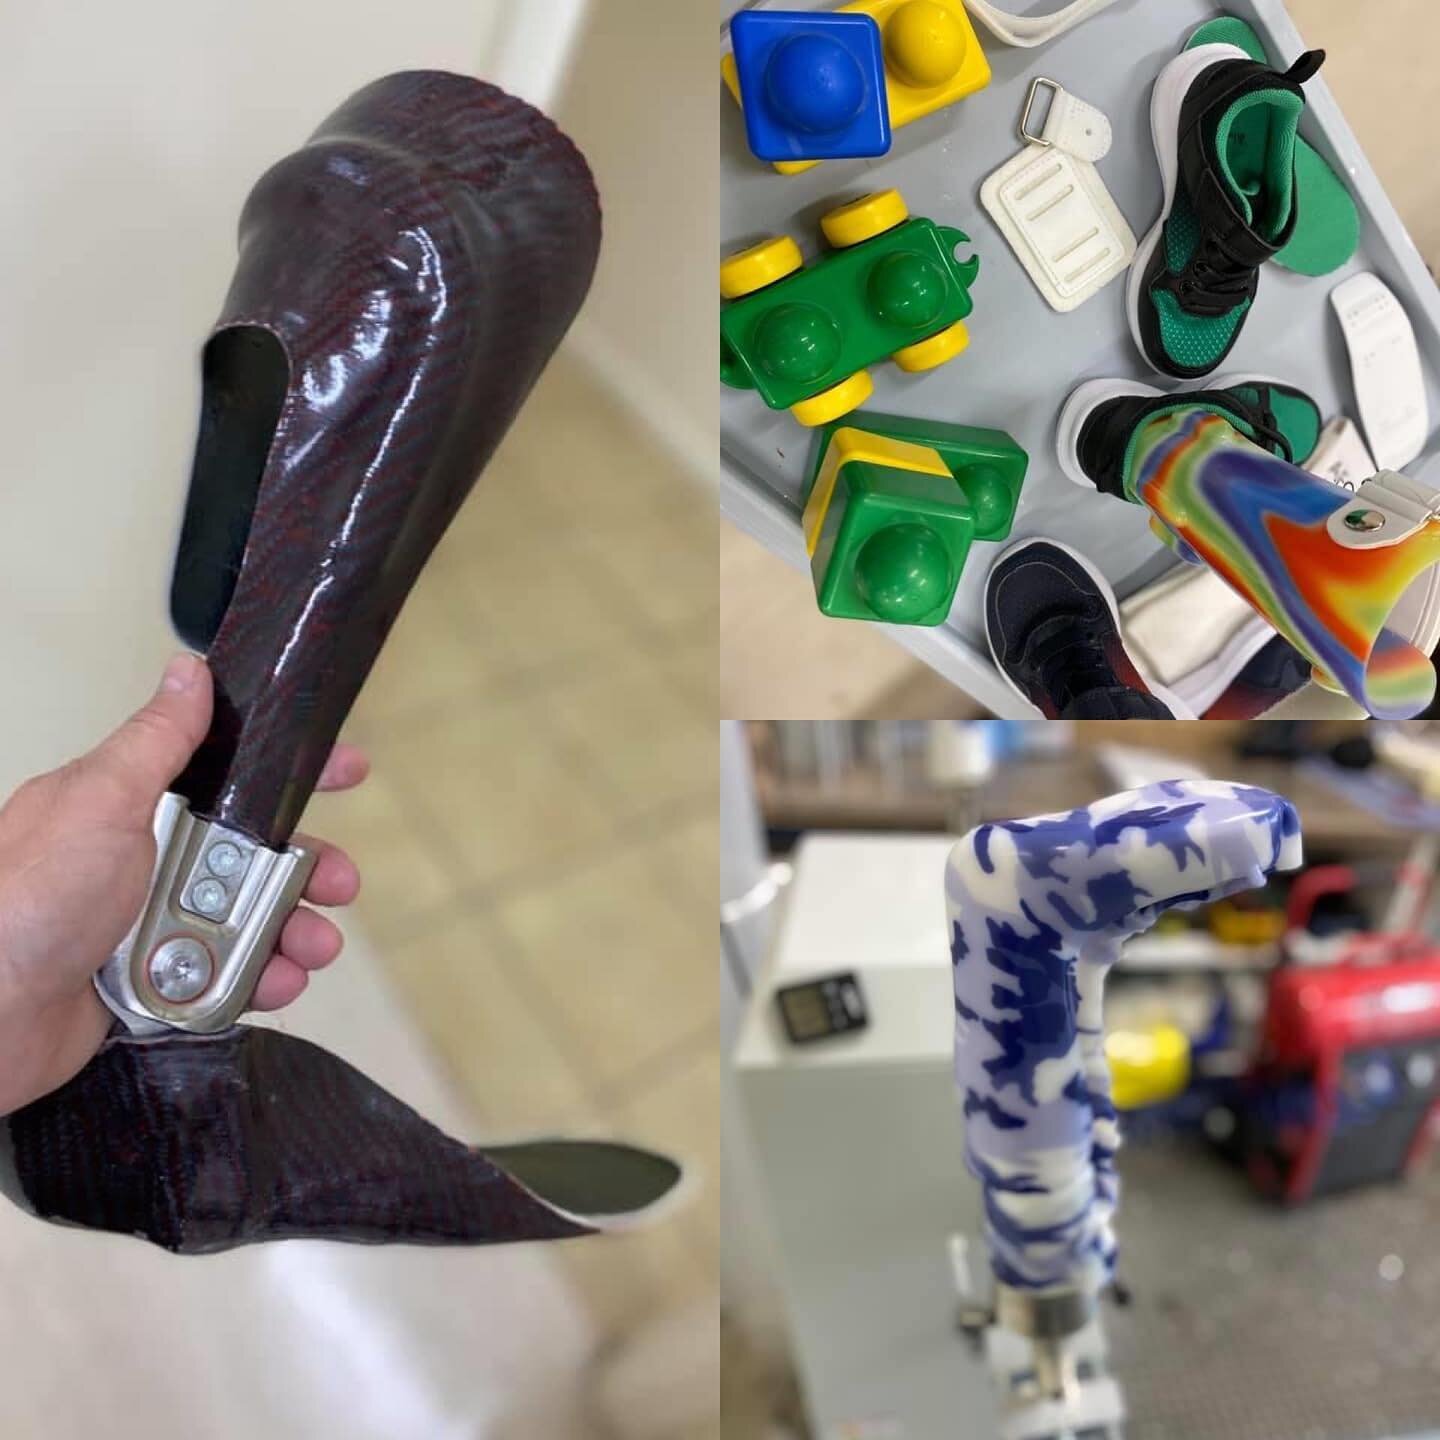 Some of the things that have been keeping us busy lately.  #orthoticsandprosthetics #orthotics #afo #greatthingshappenhere